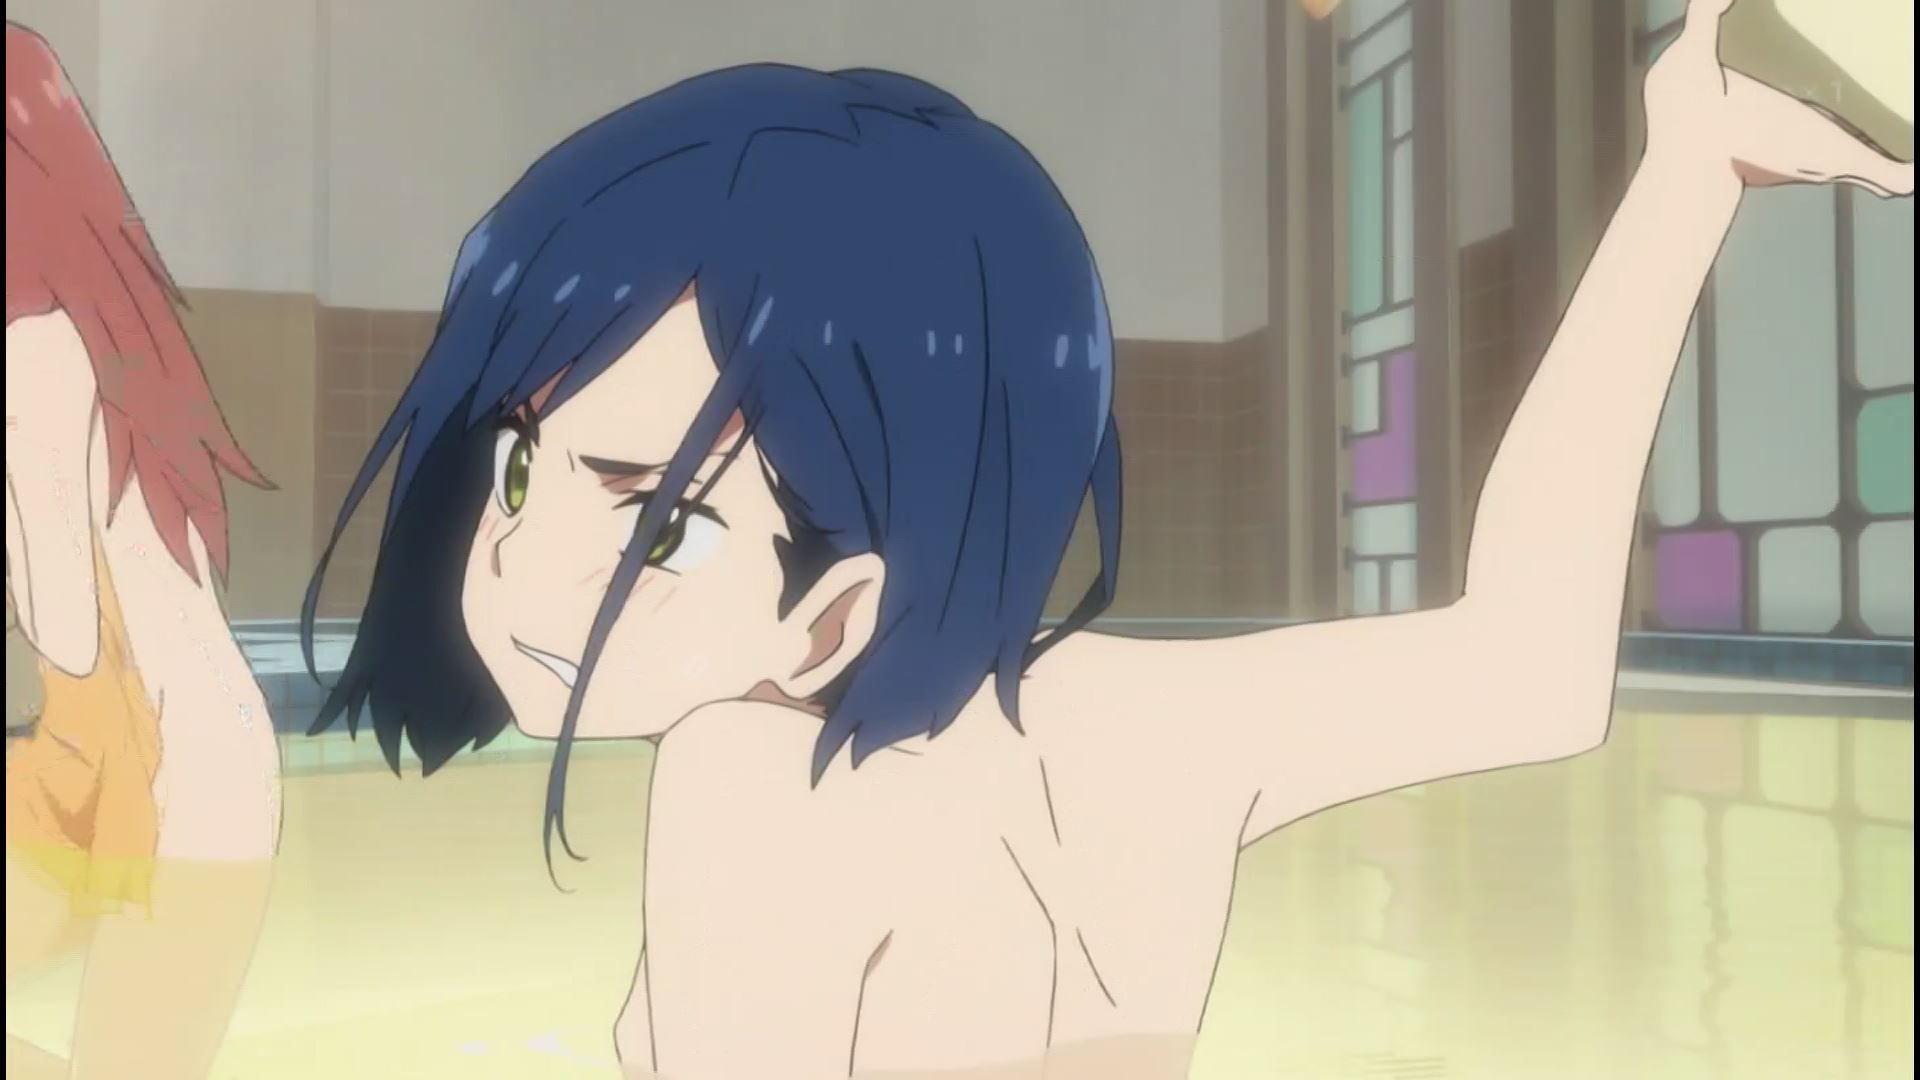 such as the bath scene and the girl's suit melts in anime ' darling in the Franc kiss ' 8 story! 22